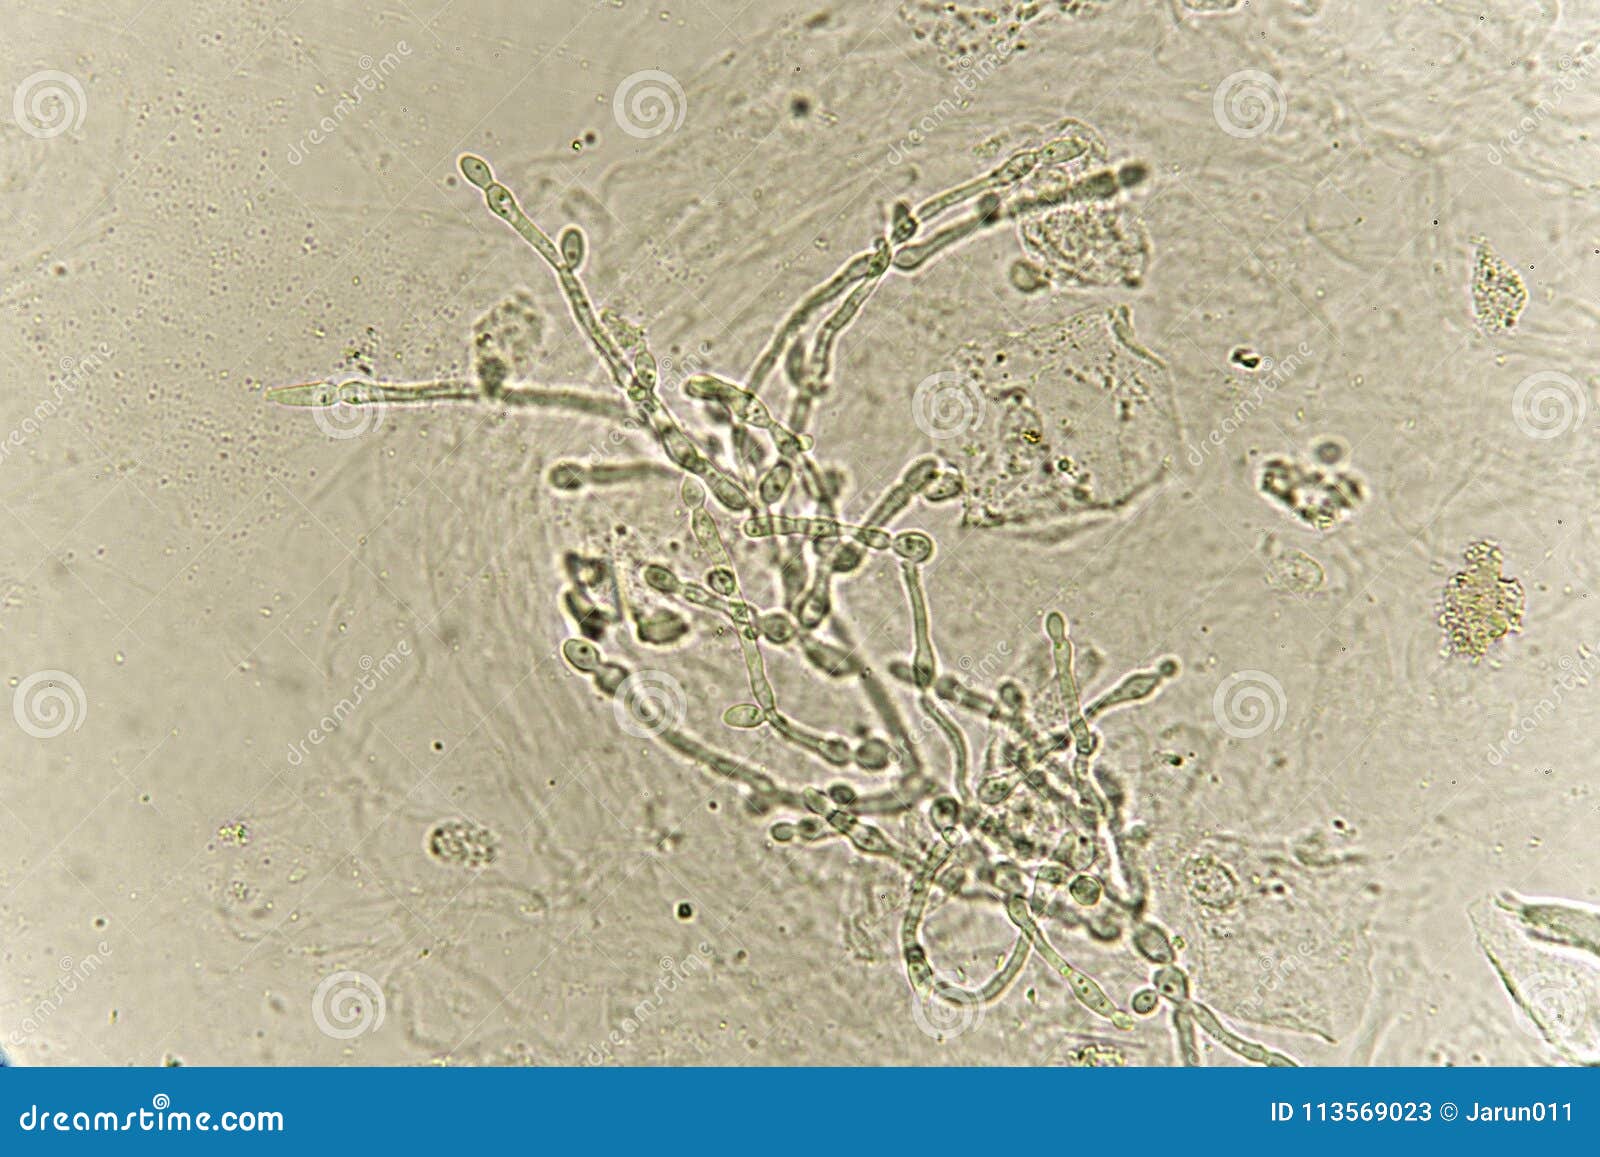 Pseudohyphae And Budding Yeast Cells In Patient Urine Stock Image